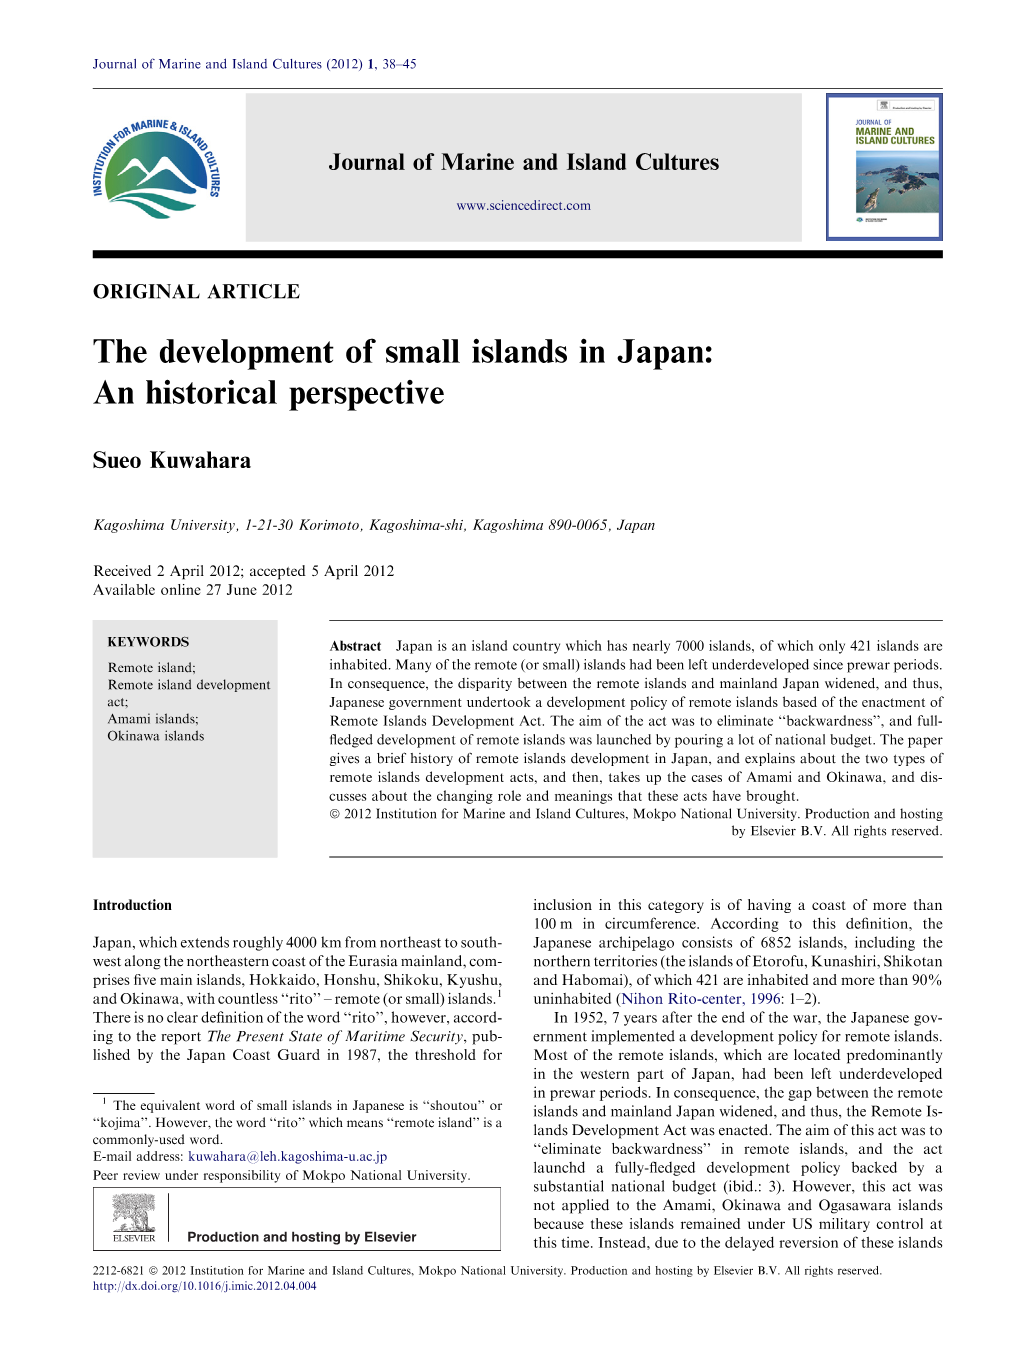 The Development of Small Islands in Japan: an Historical Perspective